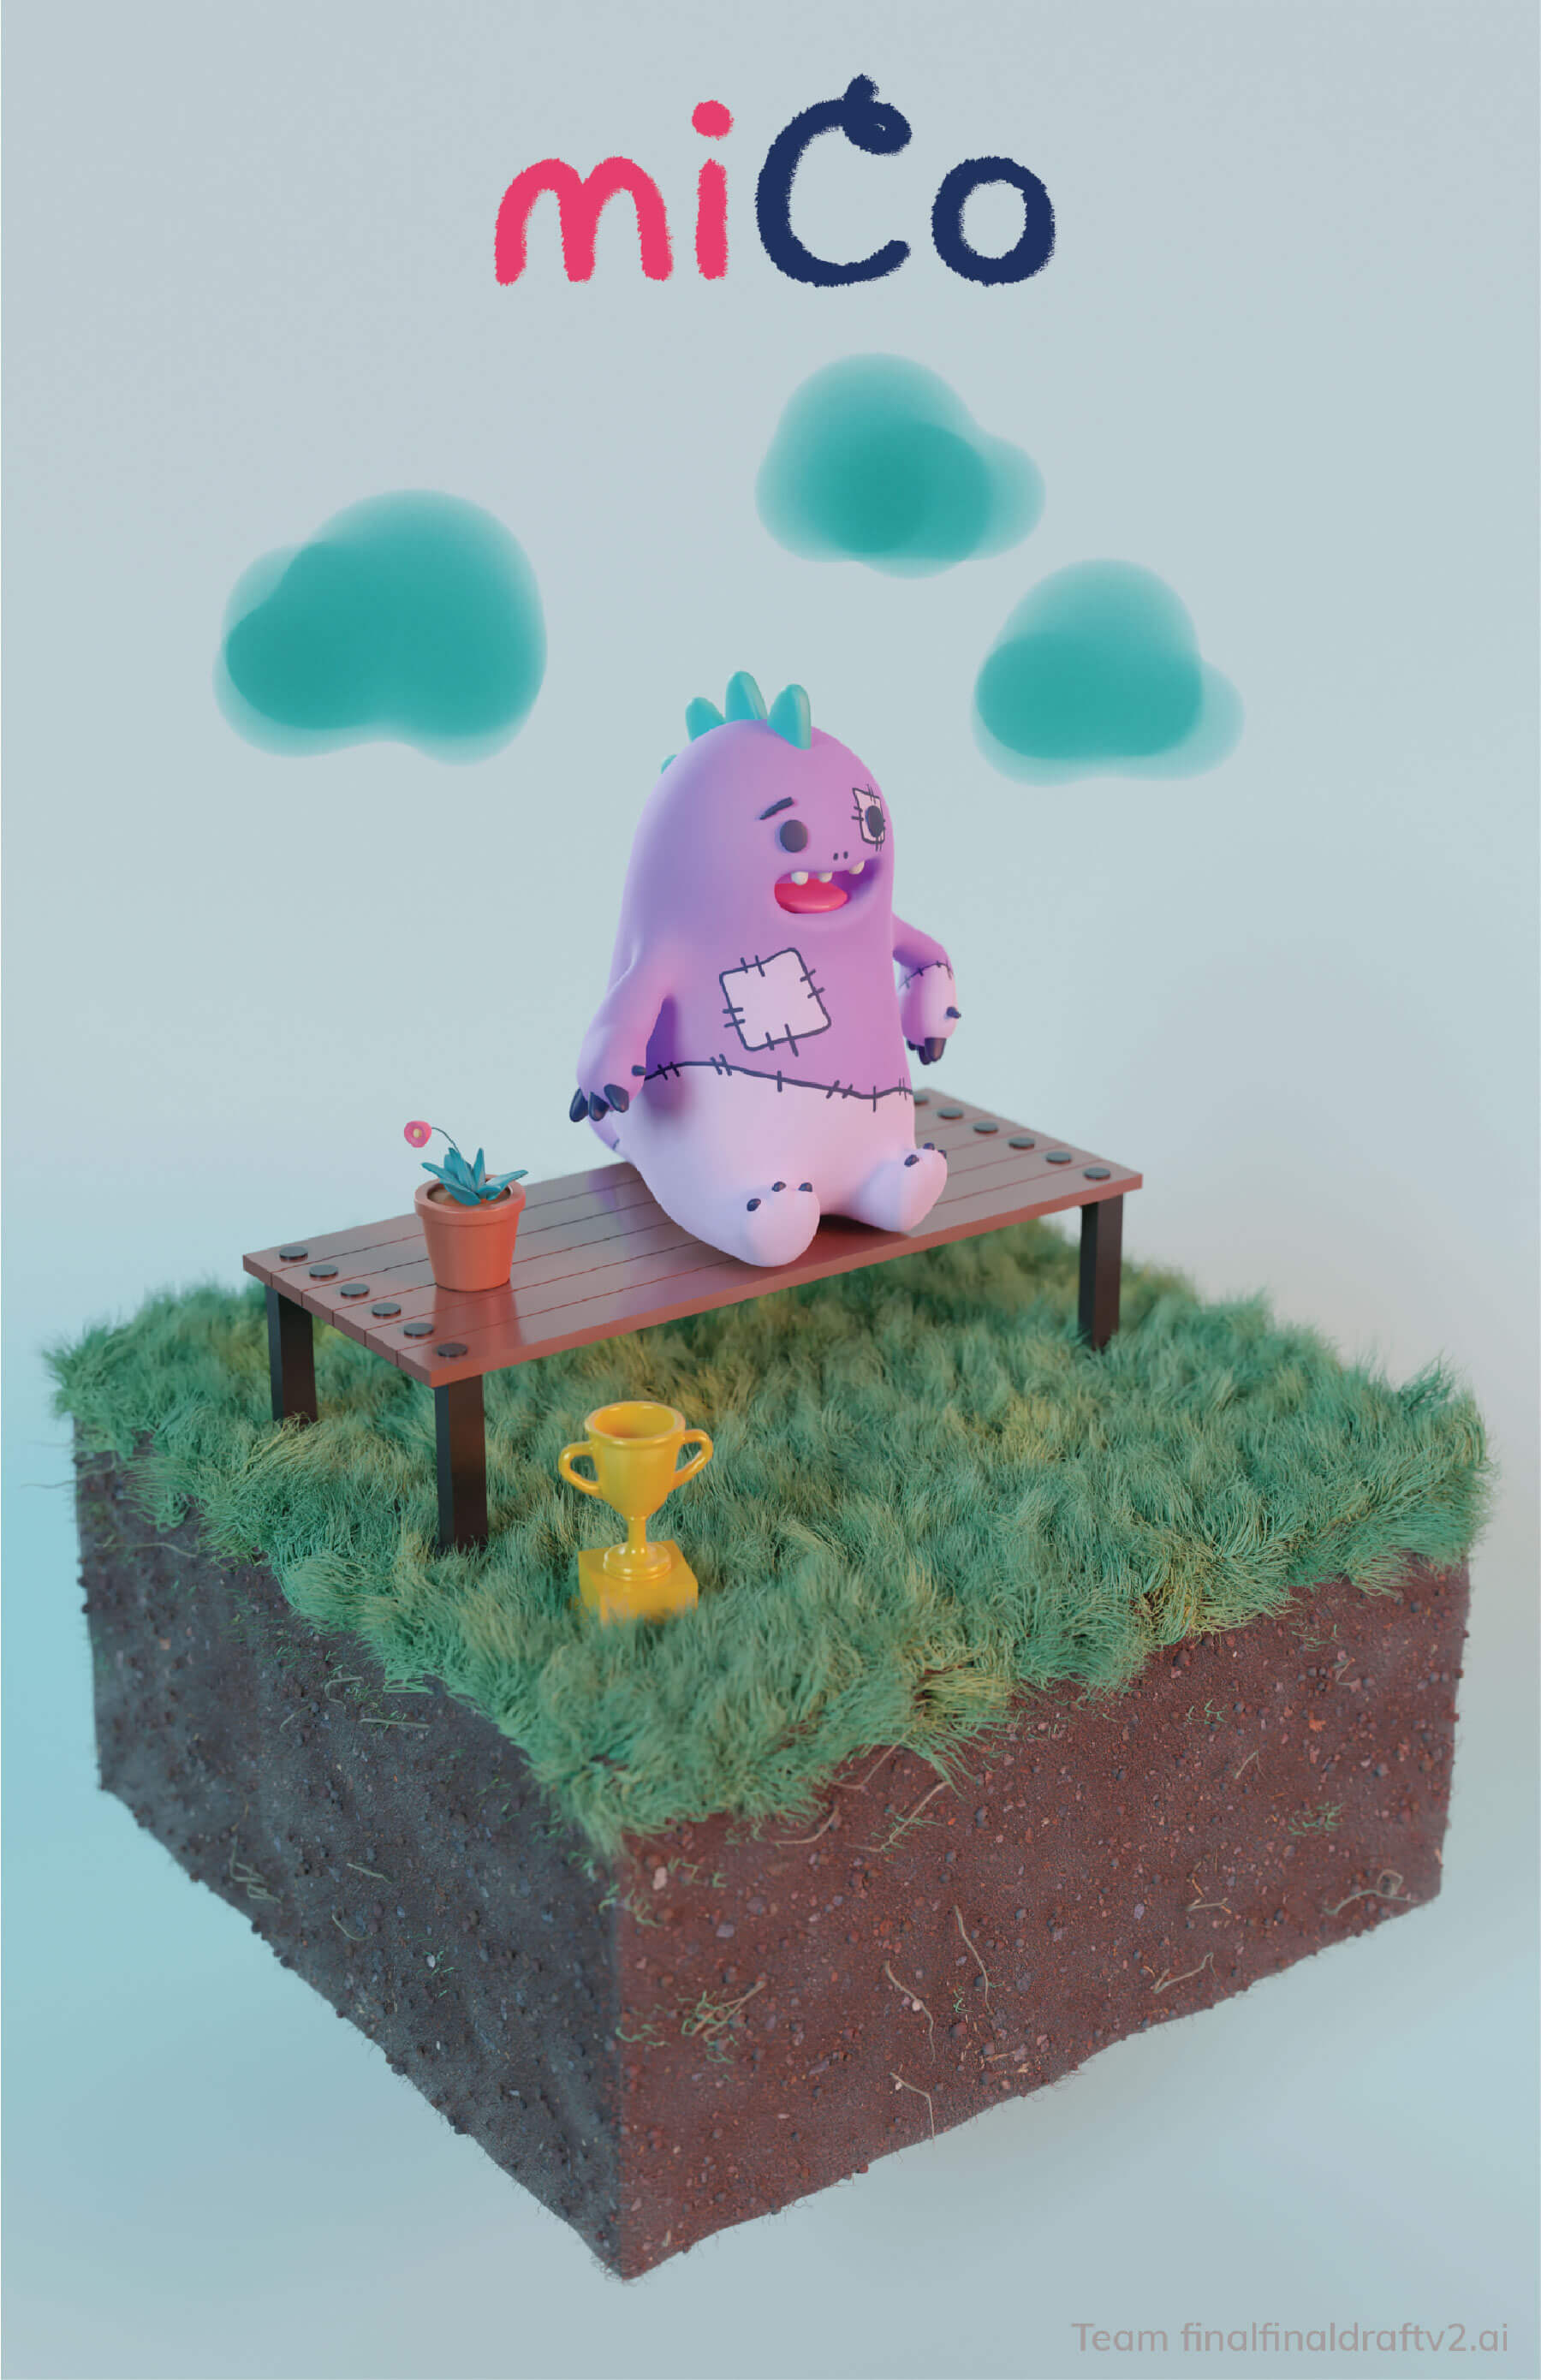 Render of the main character in MiCo sitting on a bench on a patch of grass